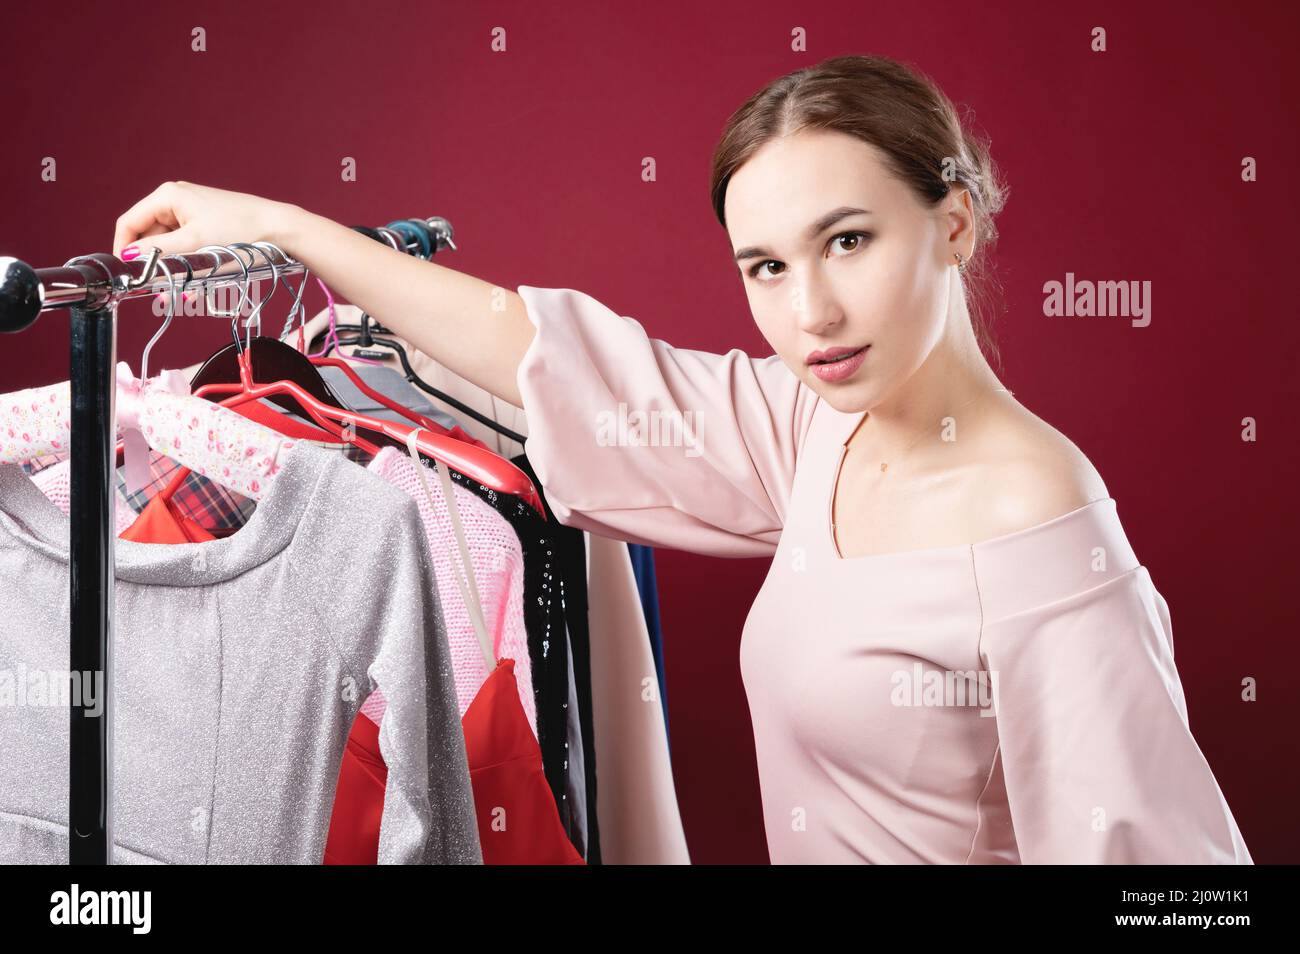 Serious perplexed standing next to a hanger for things holding one hanger in her hand. The concept of choosing clothes and happi Stock Photo